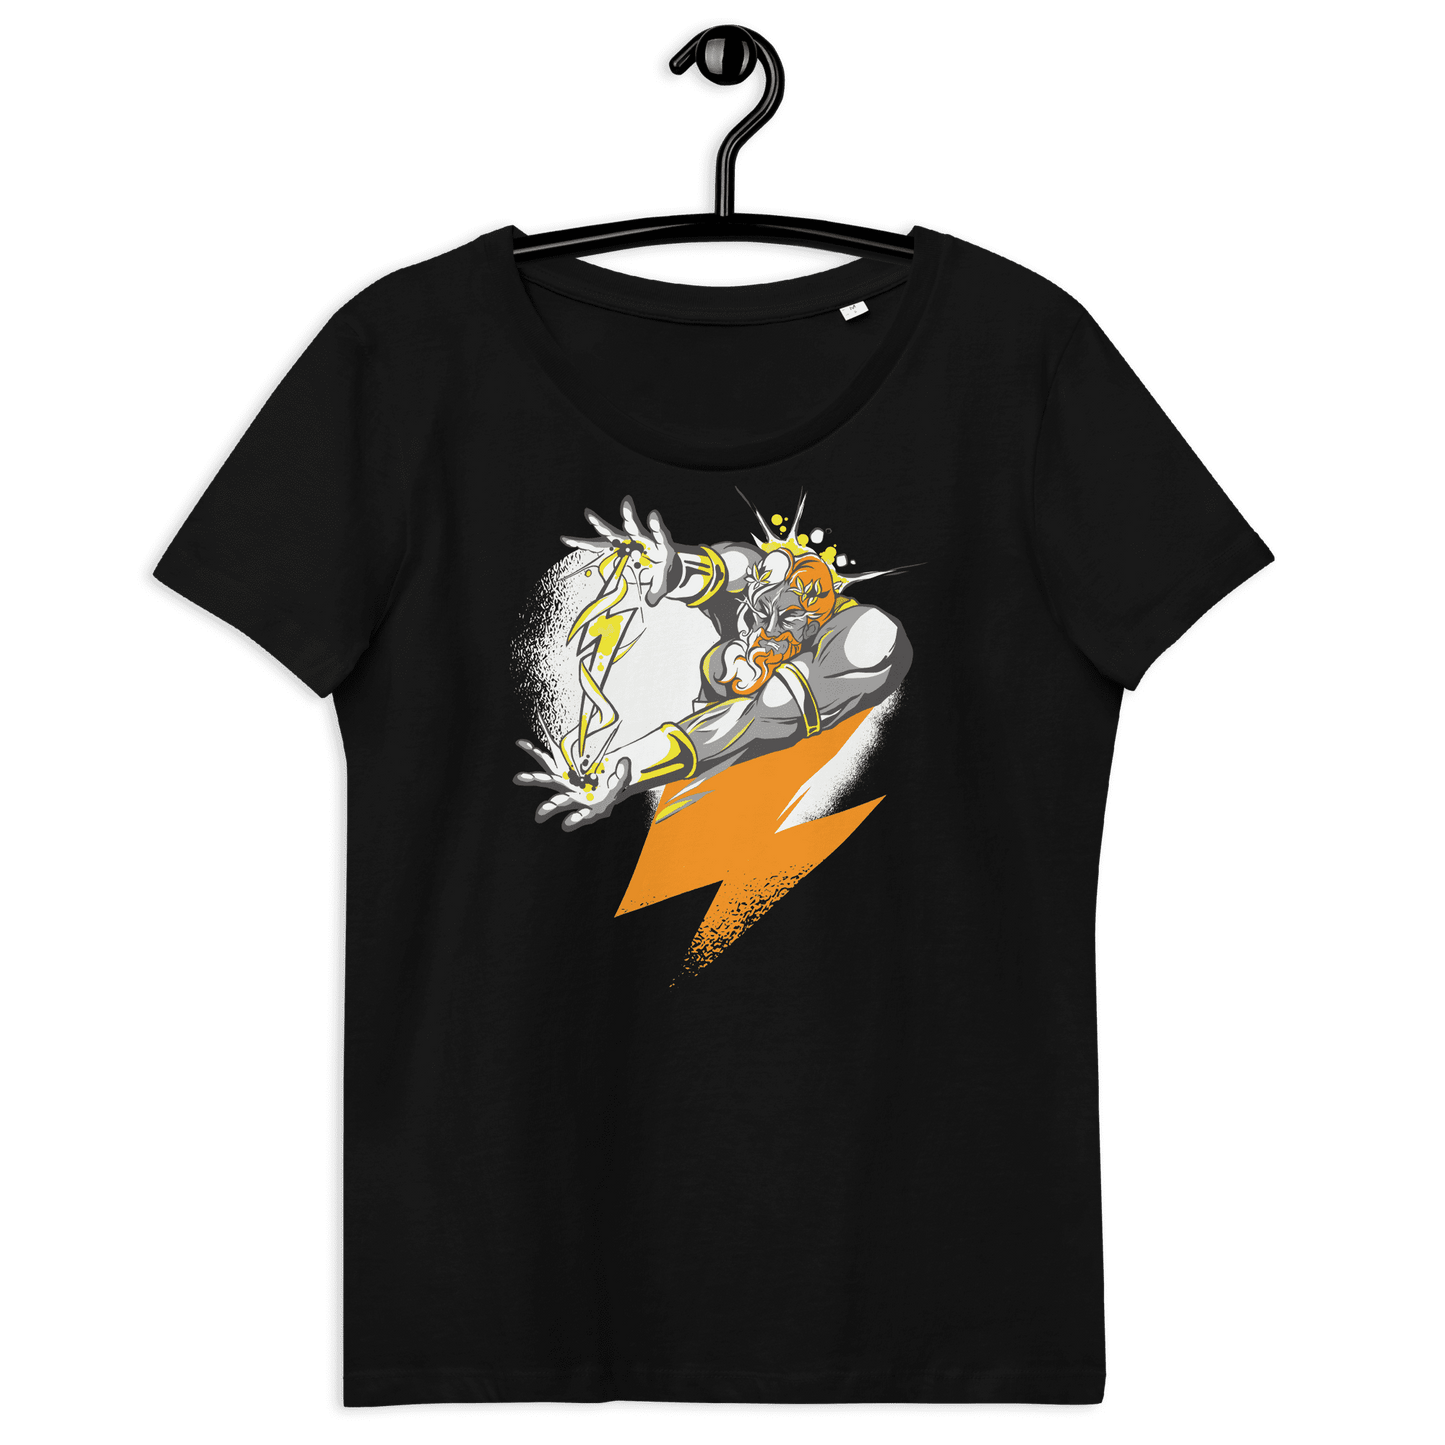 Zeus Supporter Women's fitted eco tee